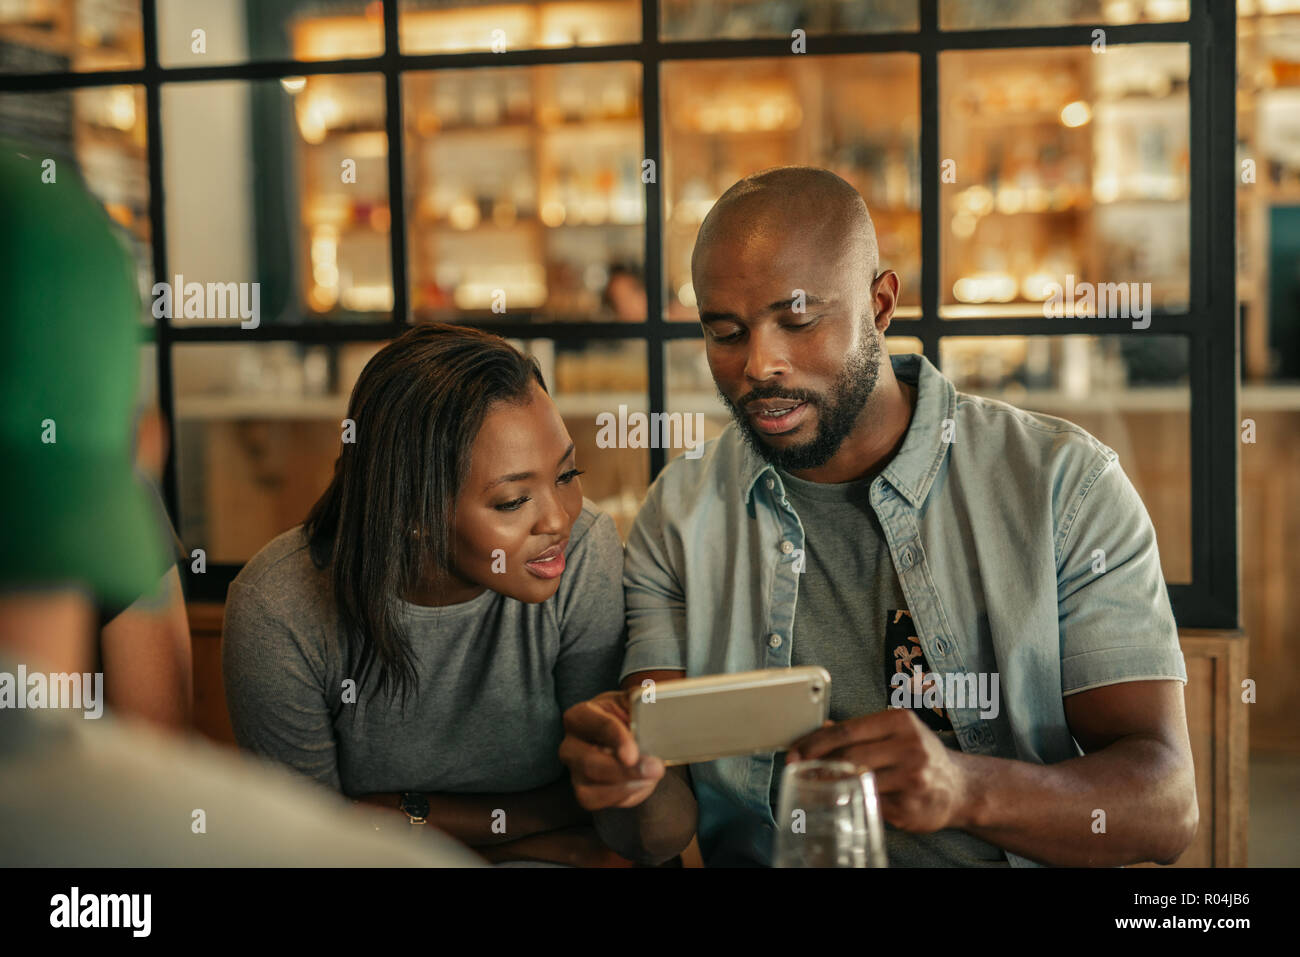 Two friends sitting in a bar looking at cellphone photos Stock Photo